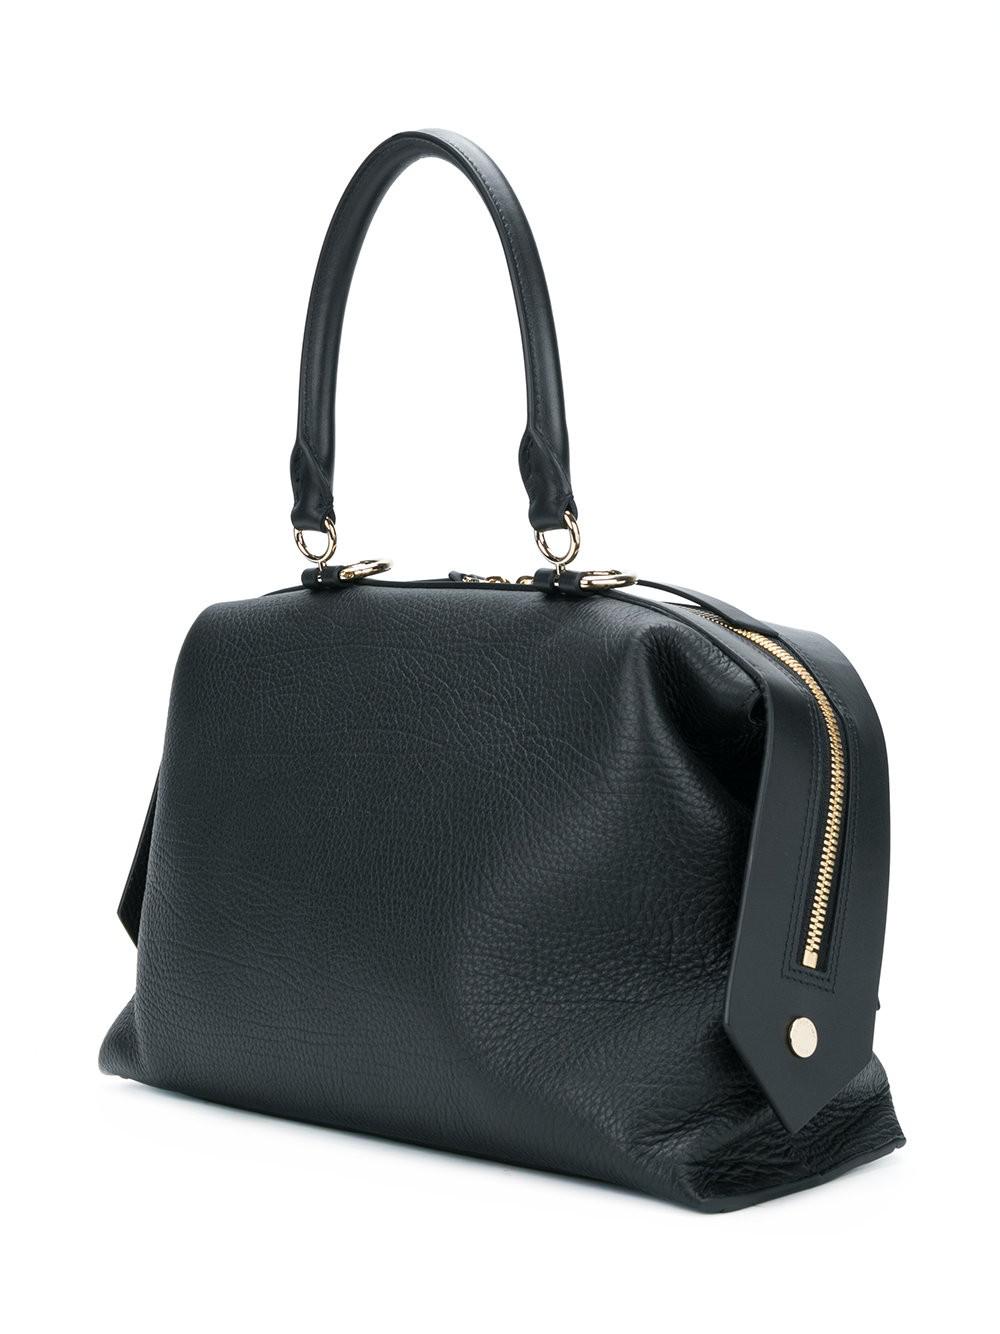 Givenchy Leather Sway Bag in Black | Lyst